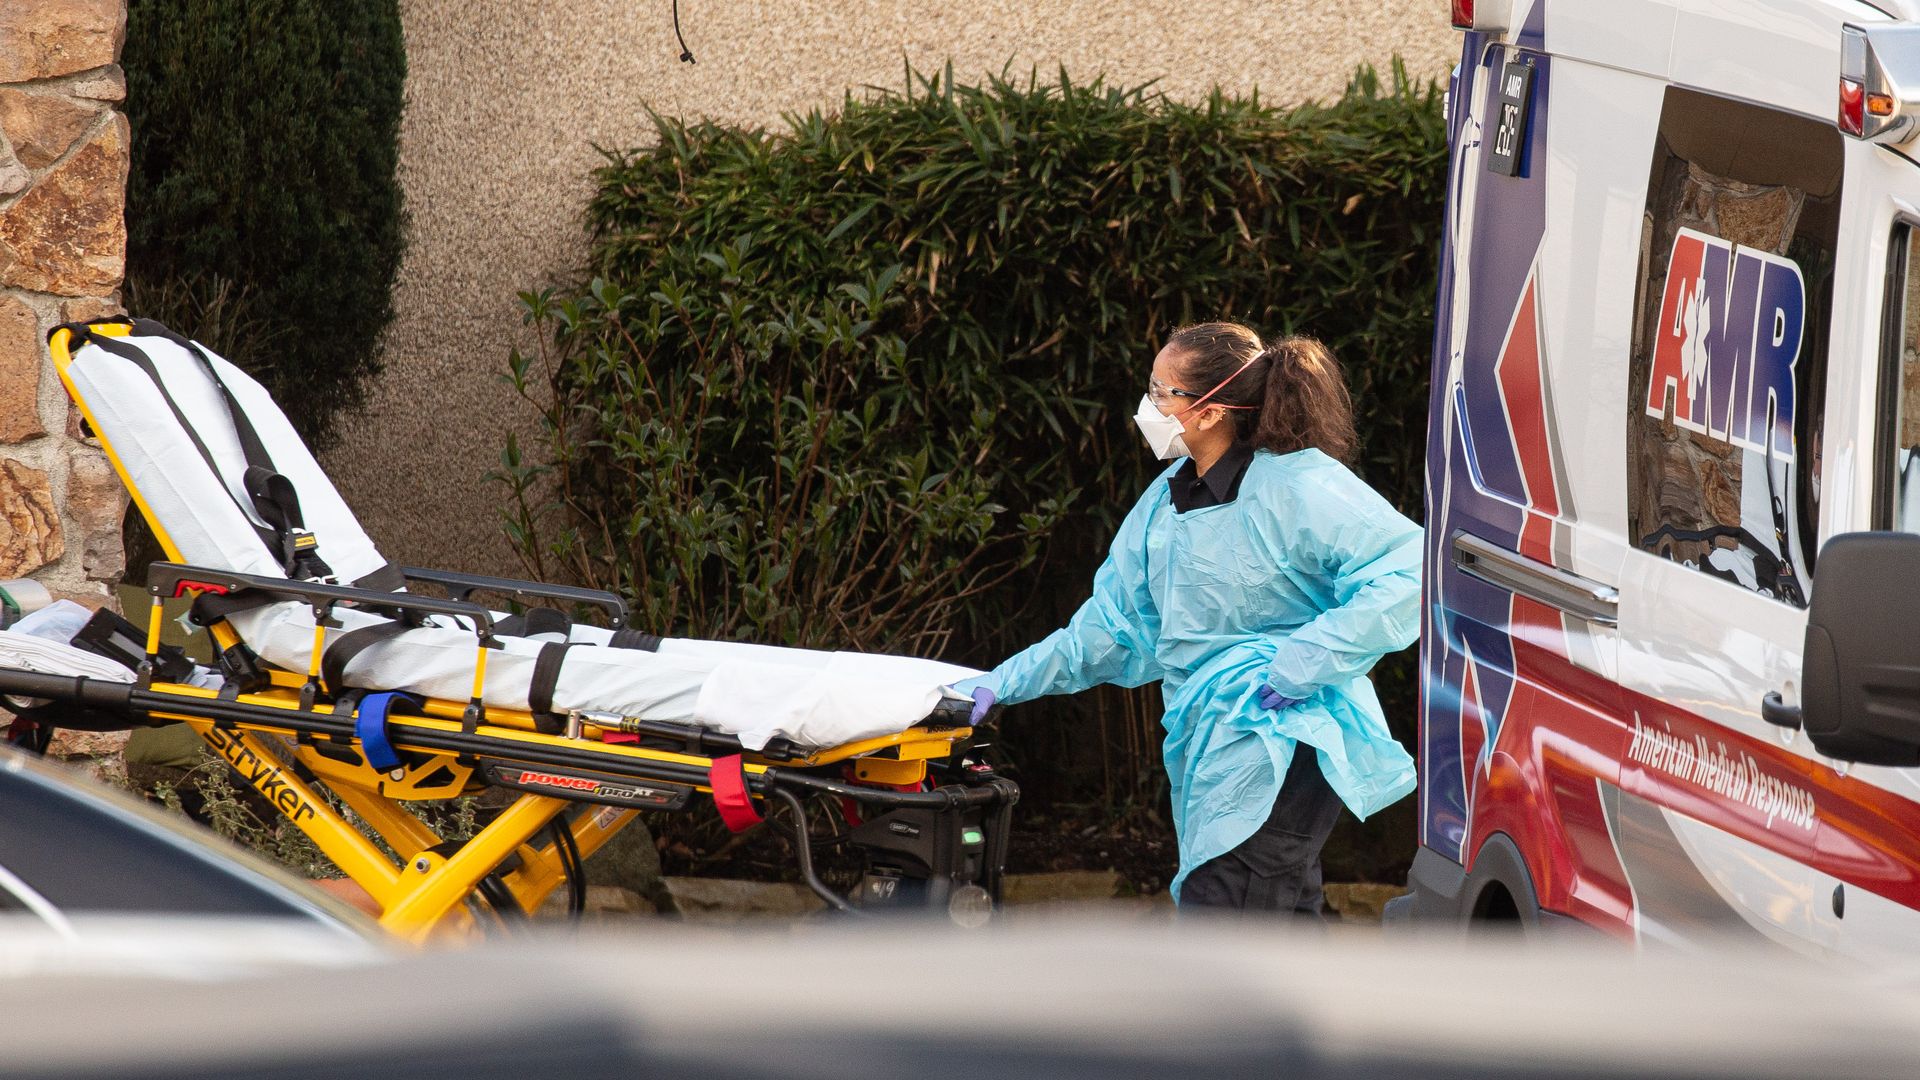 A health care worker prepares to transport a patient into an ambulance in Kirkland, Washington.